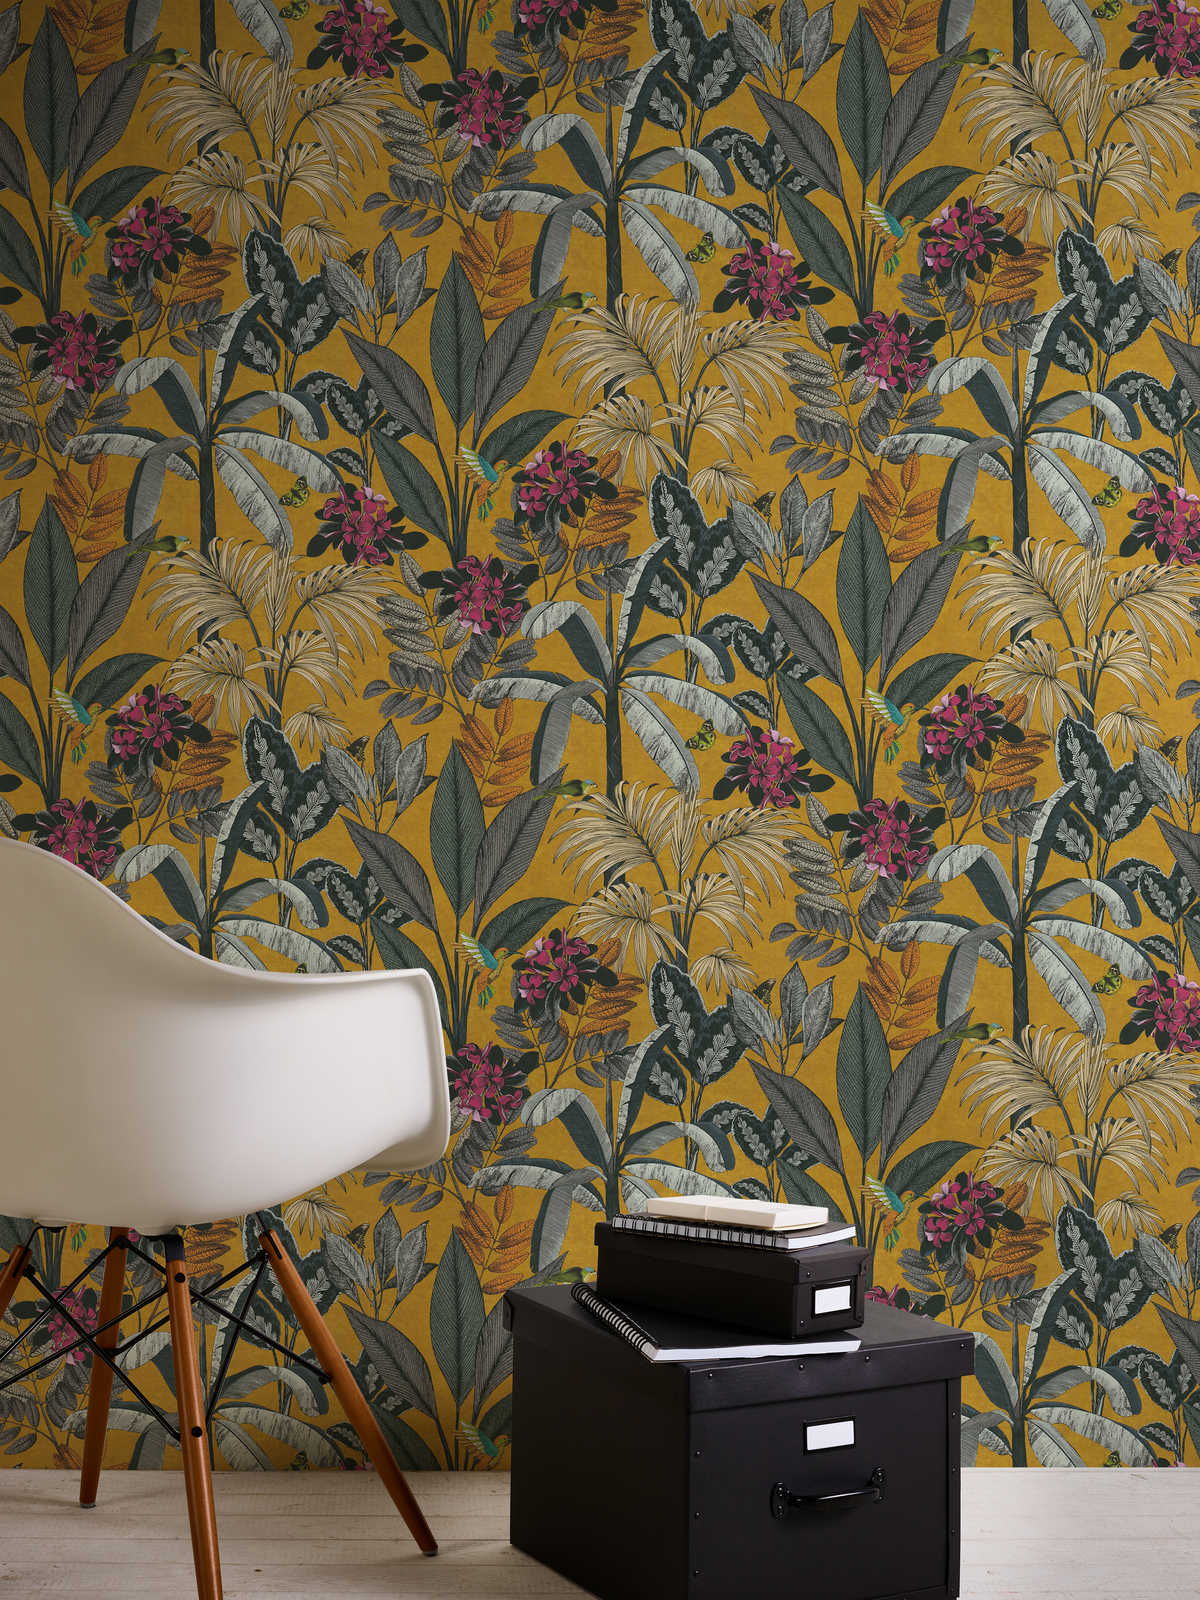             Mustard yellow wallpaper with tropical leaves and flowers pattern
        